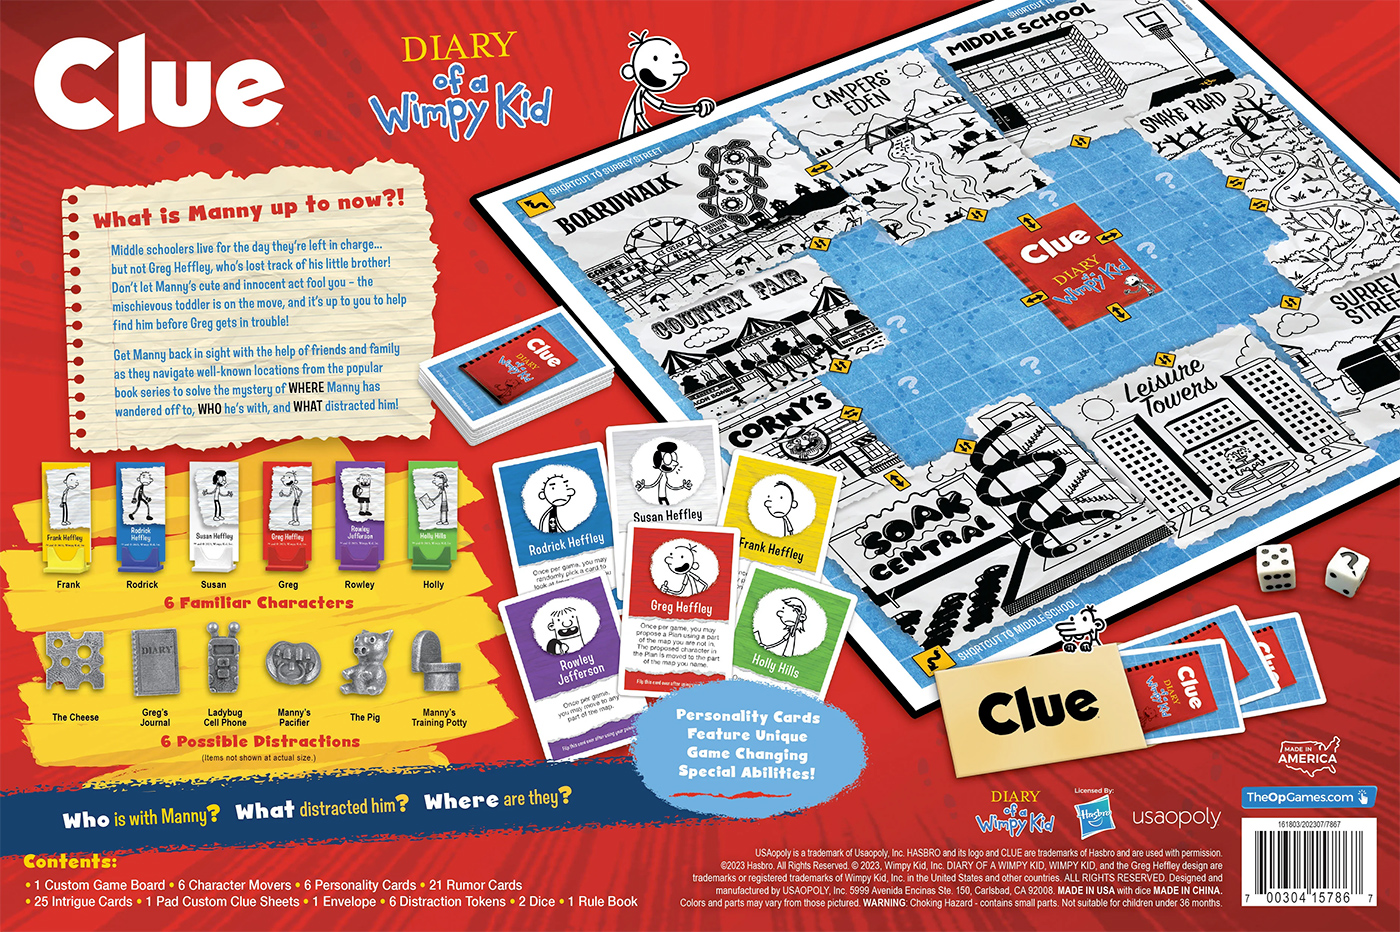 Diary of a Wimpy Kid Clue (Detective) from the Book Series by Jeff Kinney